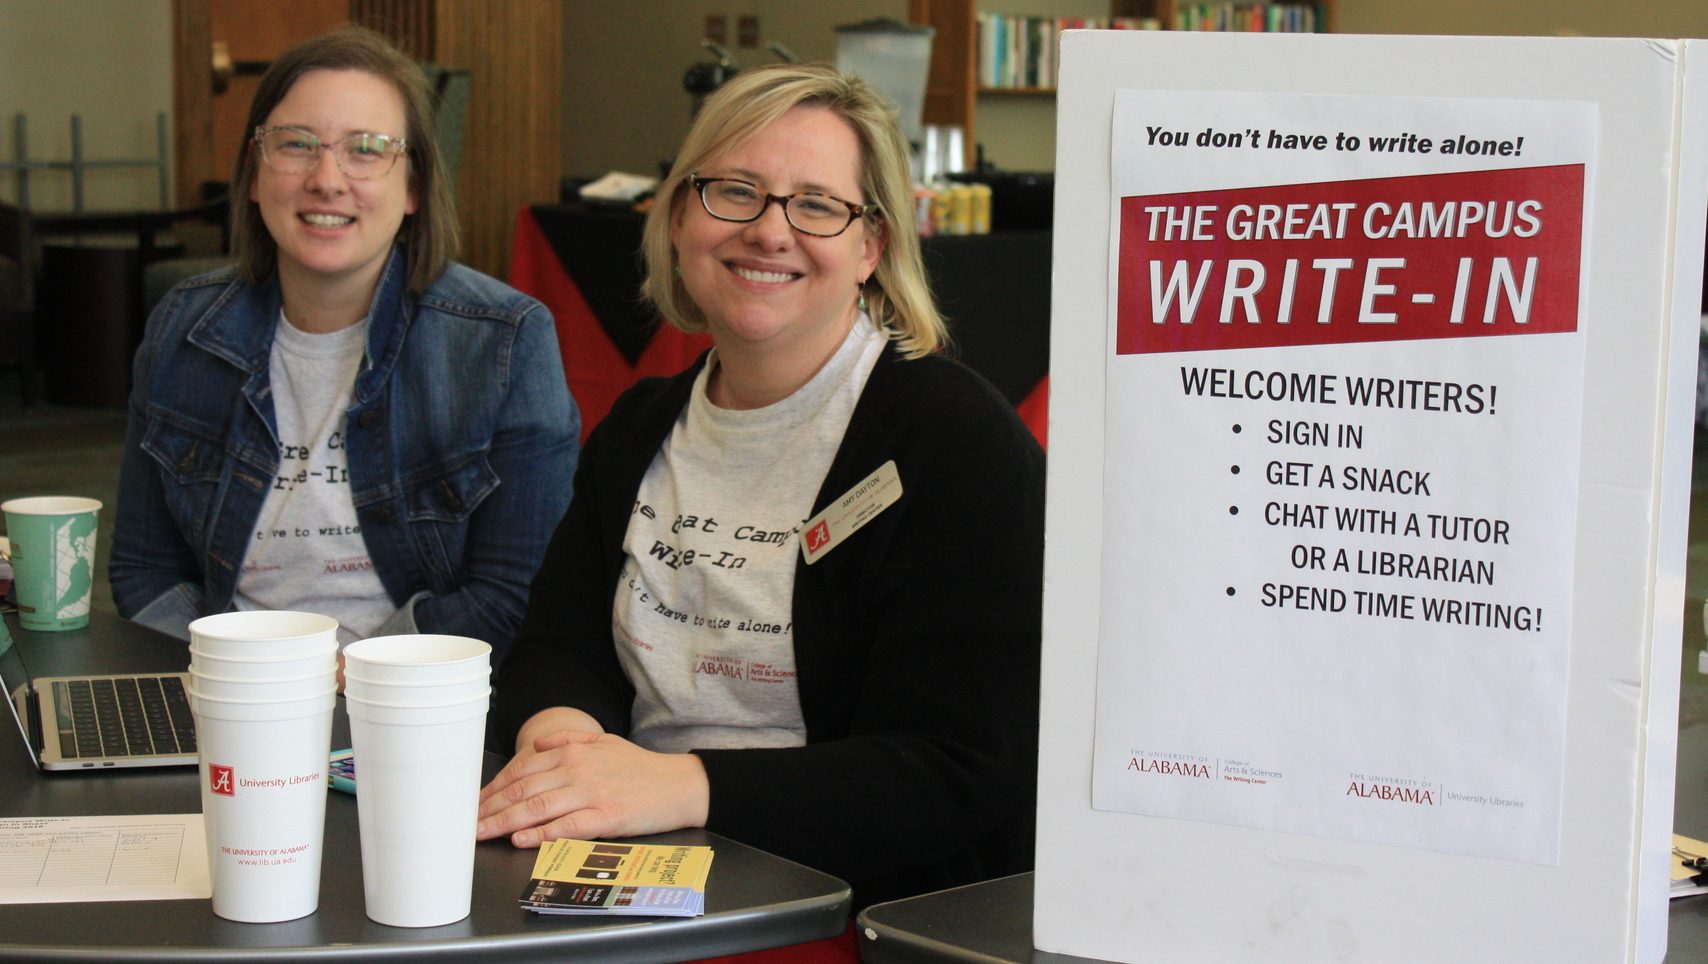 Stressed? Final Paper Due? Get Relief at The Great Campus Write-In!